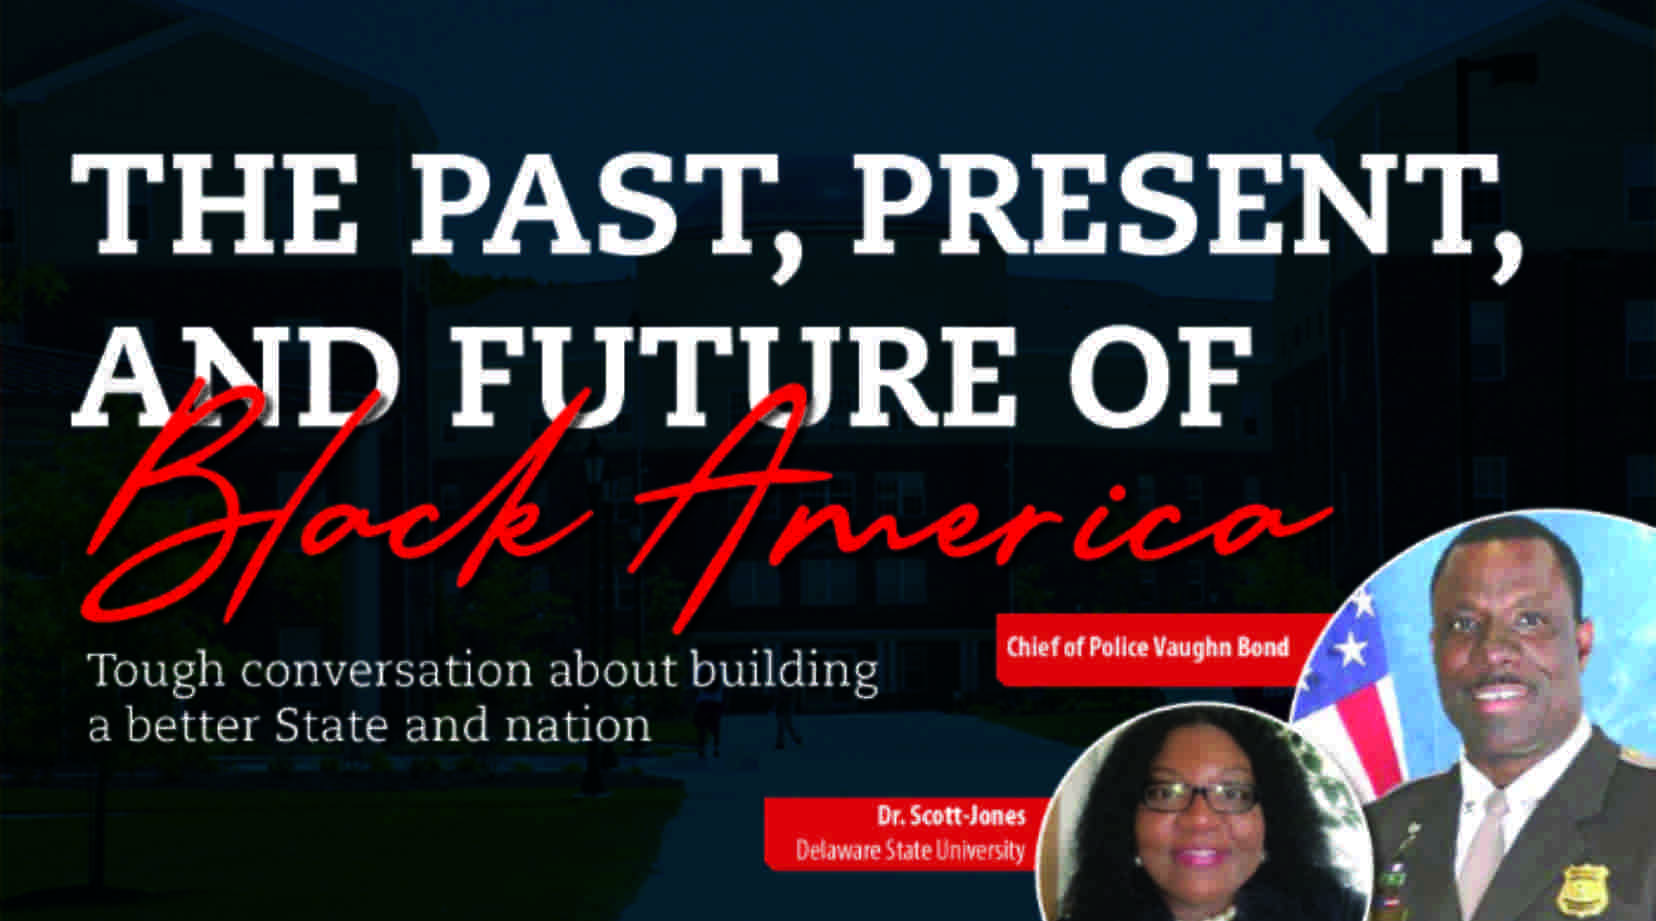 Special University Forum - The past, present, and future of Black America discussion